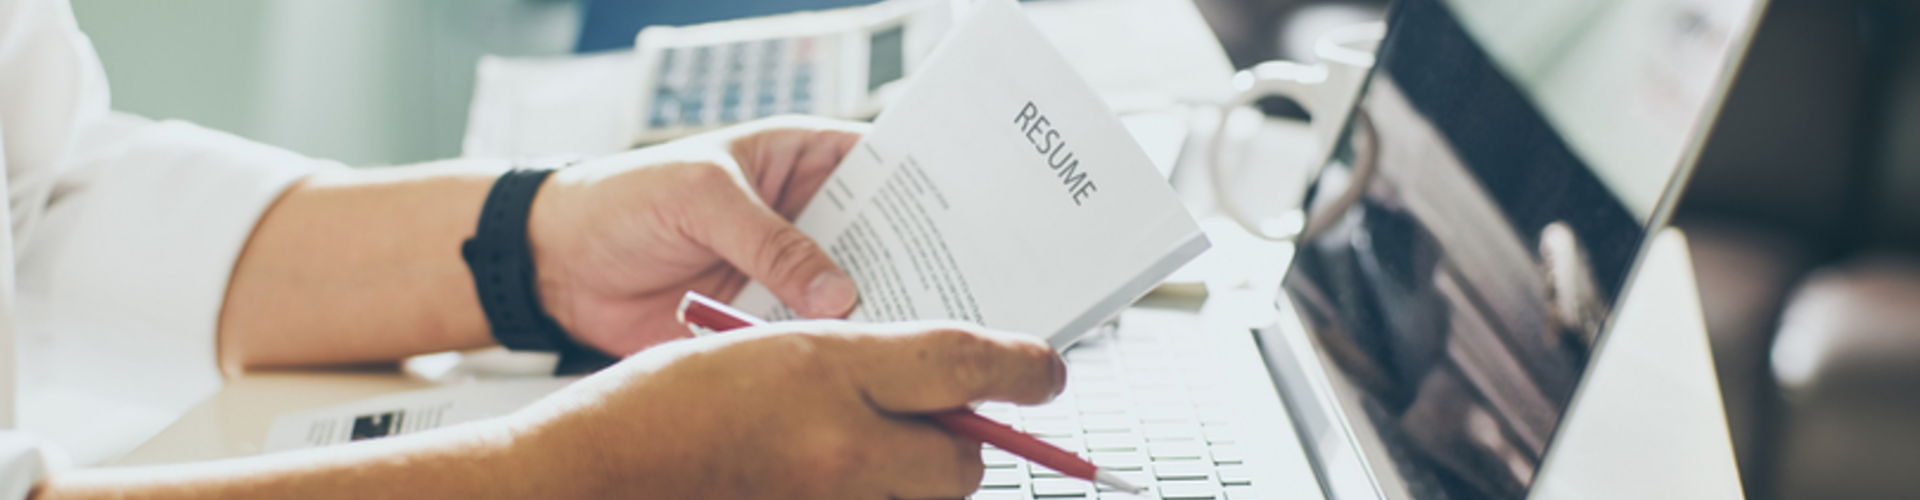 How to upgrade an outdated resume